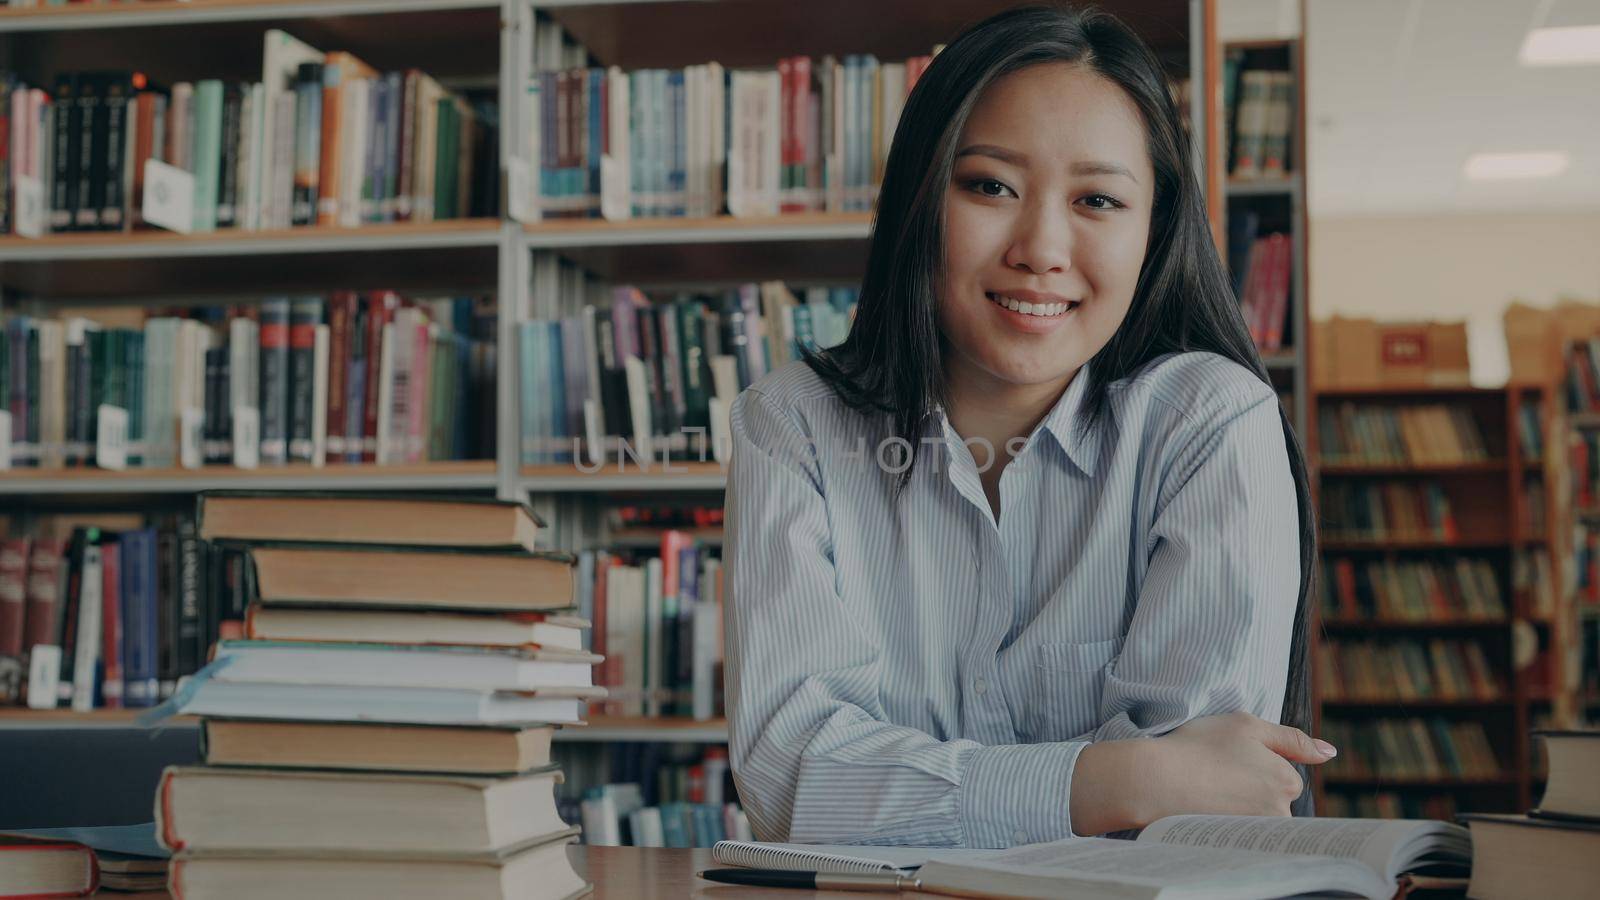 Portrait of young beautiful asian female student sitting at table with piles of textbooks in library looking at camera. She is smiling positively. by silverkblack